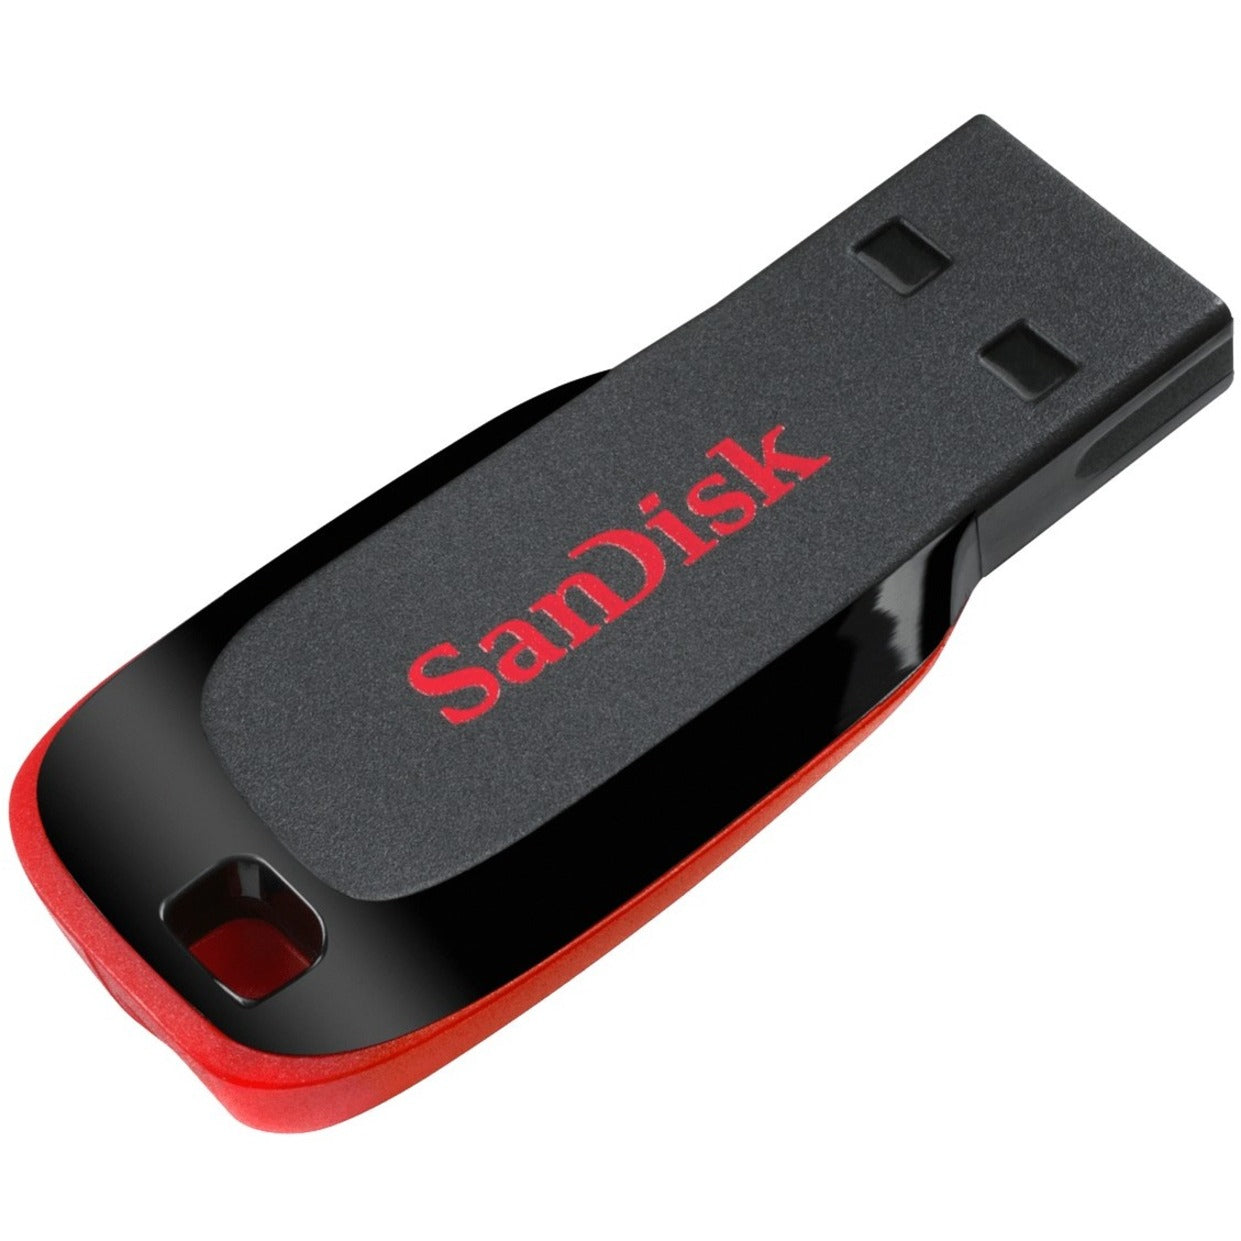 SanDisk SDCZ50-016G-A46 Cruzer Blade USB Flash Drive 16GB, Compact and Portable Storage Solution